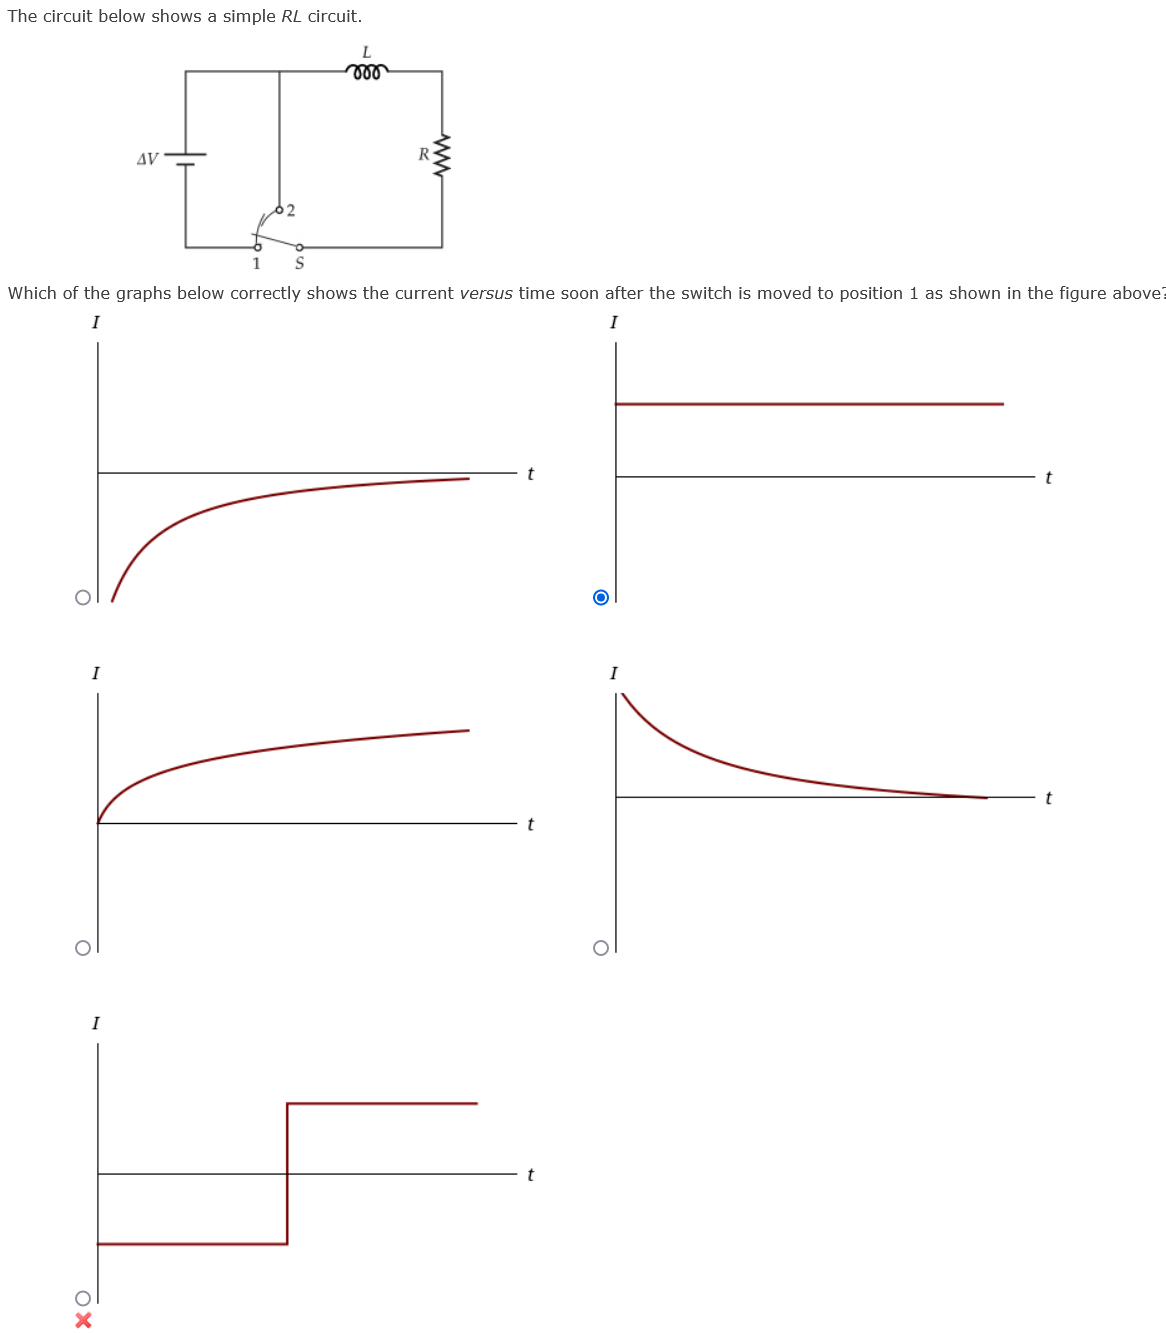 The circuit below shows a simple RL circuit.
ll
AV
1
Which of the graphs below correctly shows the current versus time soon after the switch is moved to position 1 as shown in the figure above?
I
I
I
10
